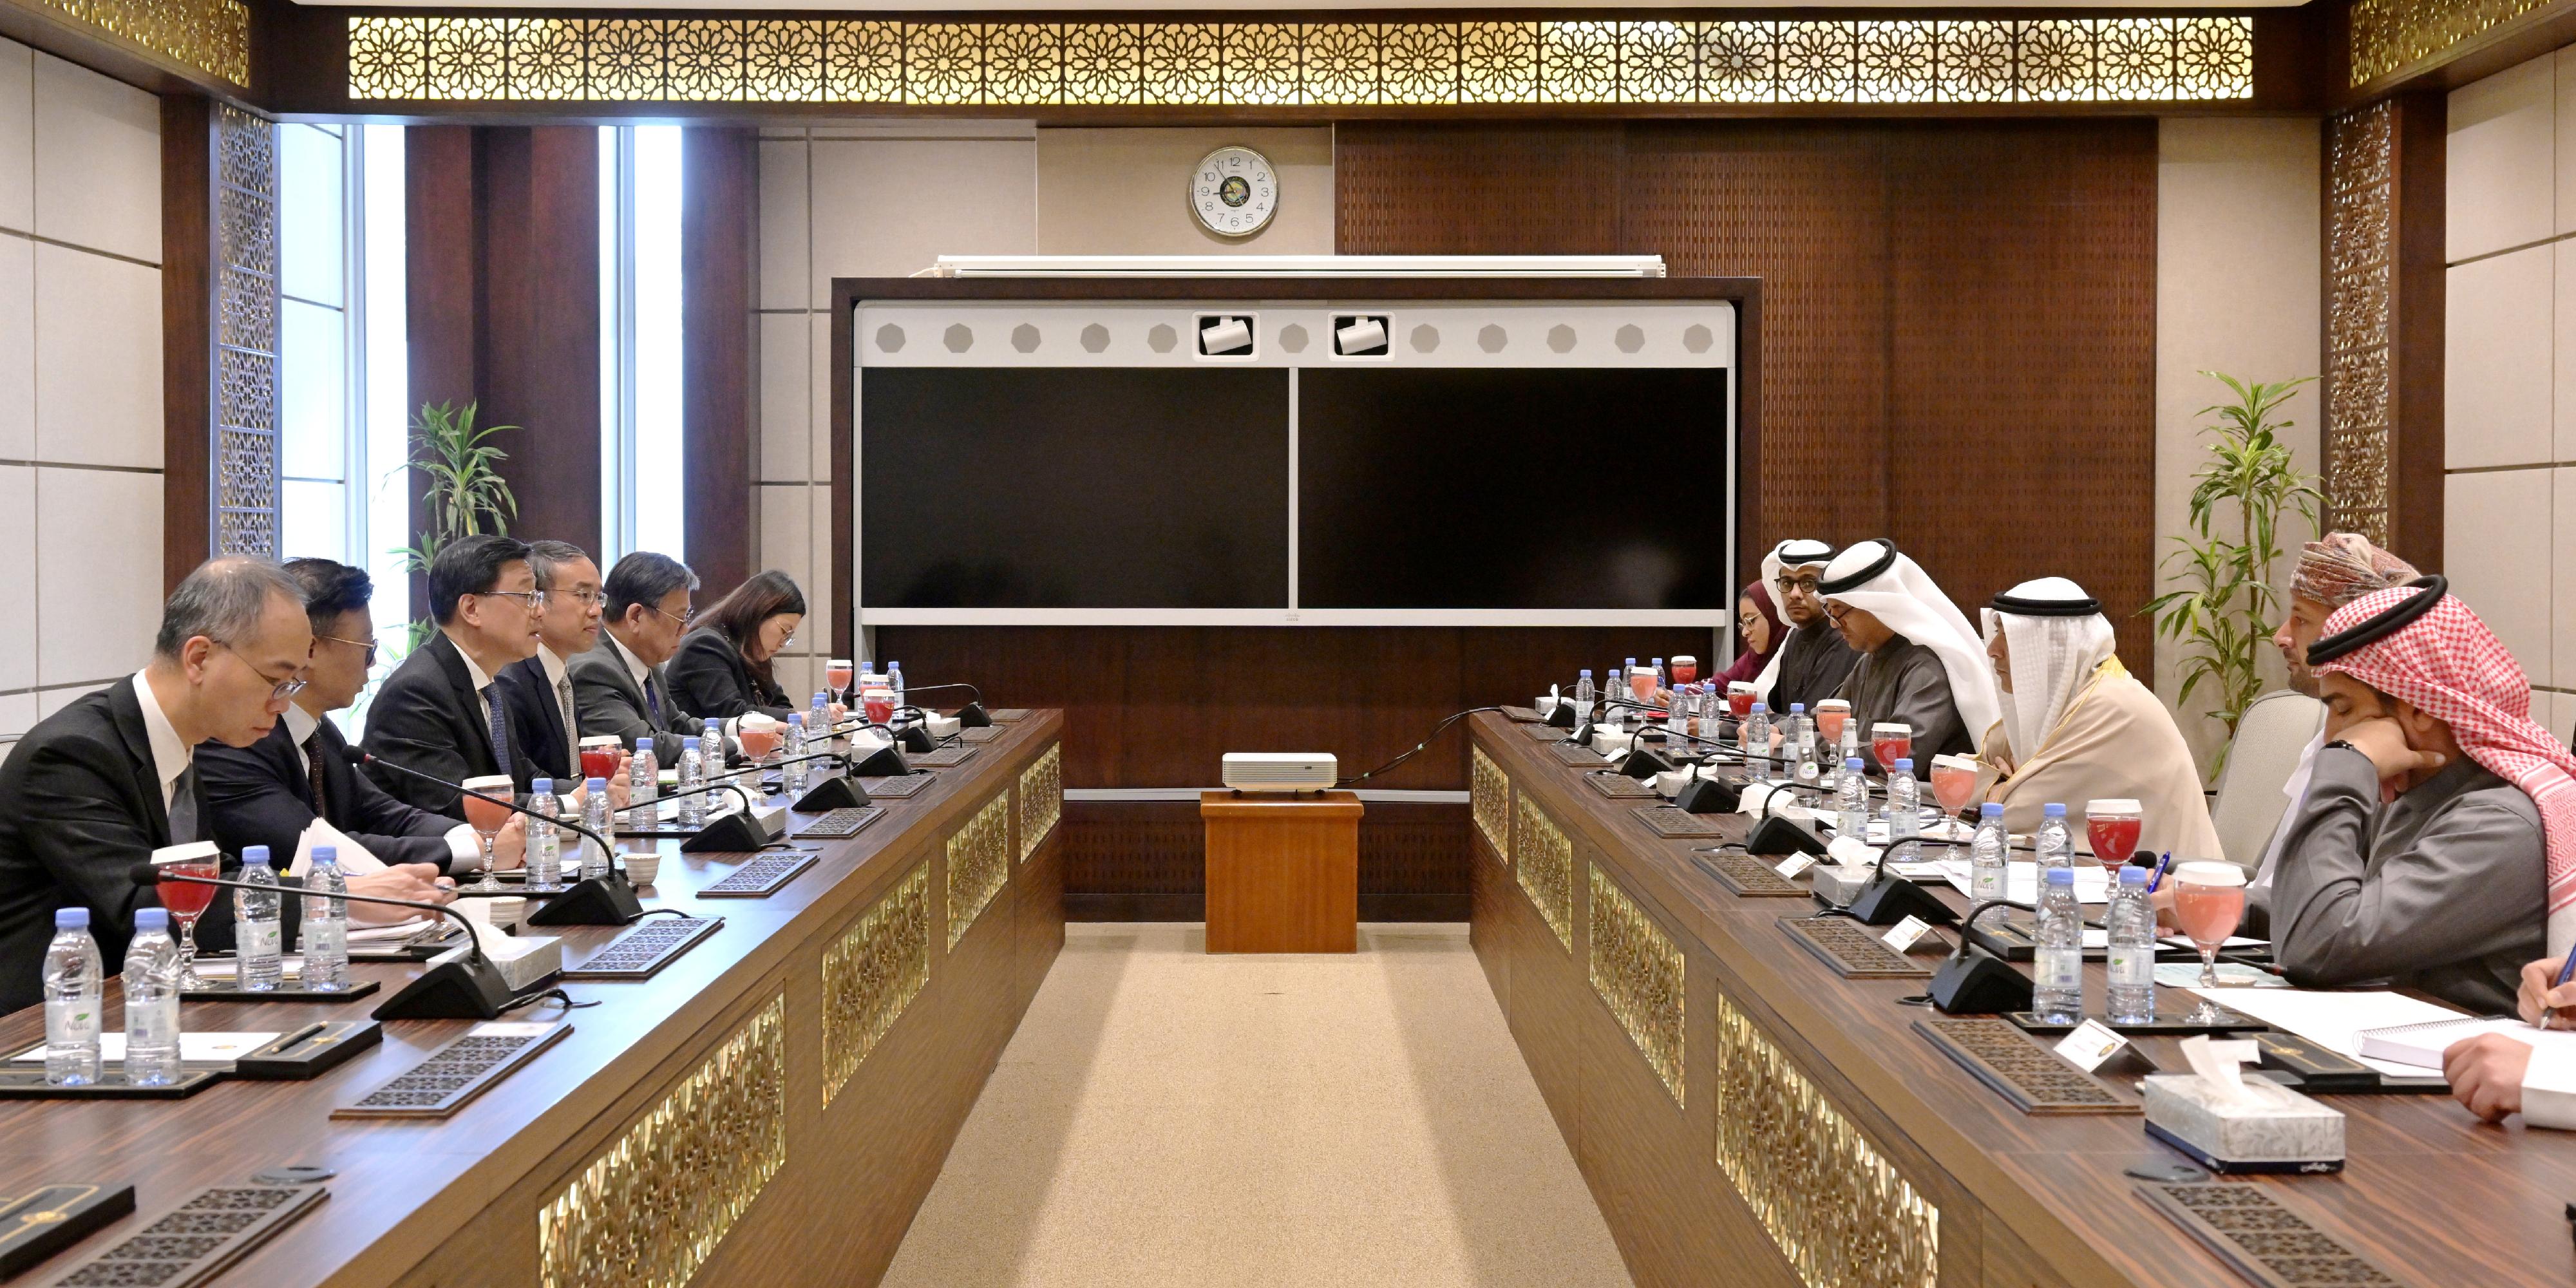 The Chief Executive, Mr John Lee (third left), meets with the Secretary-General of the Cooperation Council for the Arab States of the Gulf, Mr Jasem Mohamed Albudaiwi (third right), in Riyadh, Saudi Arabia, today (February 6, Riyadh time). The Deputy Secretary for Justice, Mr Cheung Kwok-kwan (second left); the Secretary for Financial Services and the Treasury, Mr Christopher Hui (fourth left); the Secretary for Commerce and Economic Development, Mr Algernon Yau (fifth left); the Acting Commissioner for Belt and Road, Mr Johann Wong (first left); and representatives of the Cooperation Council for the Arab States of the Gulf are also present.